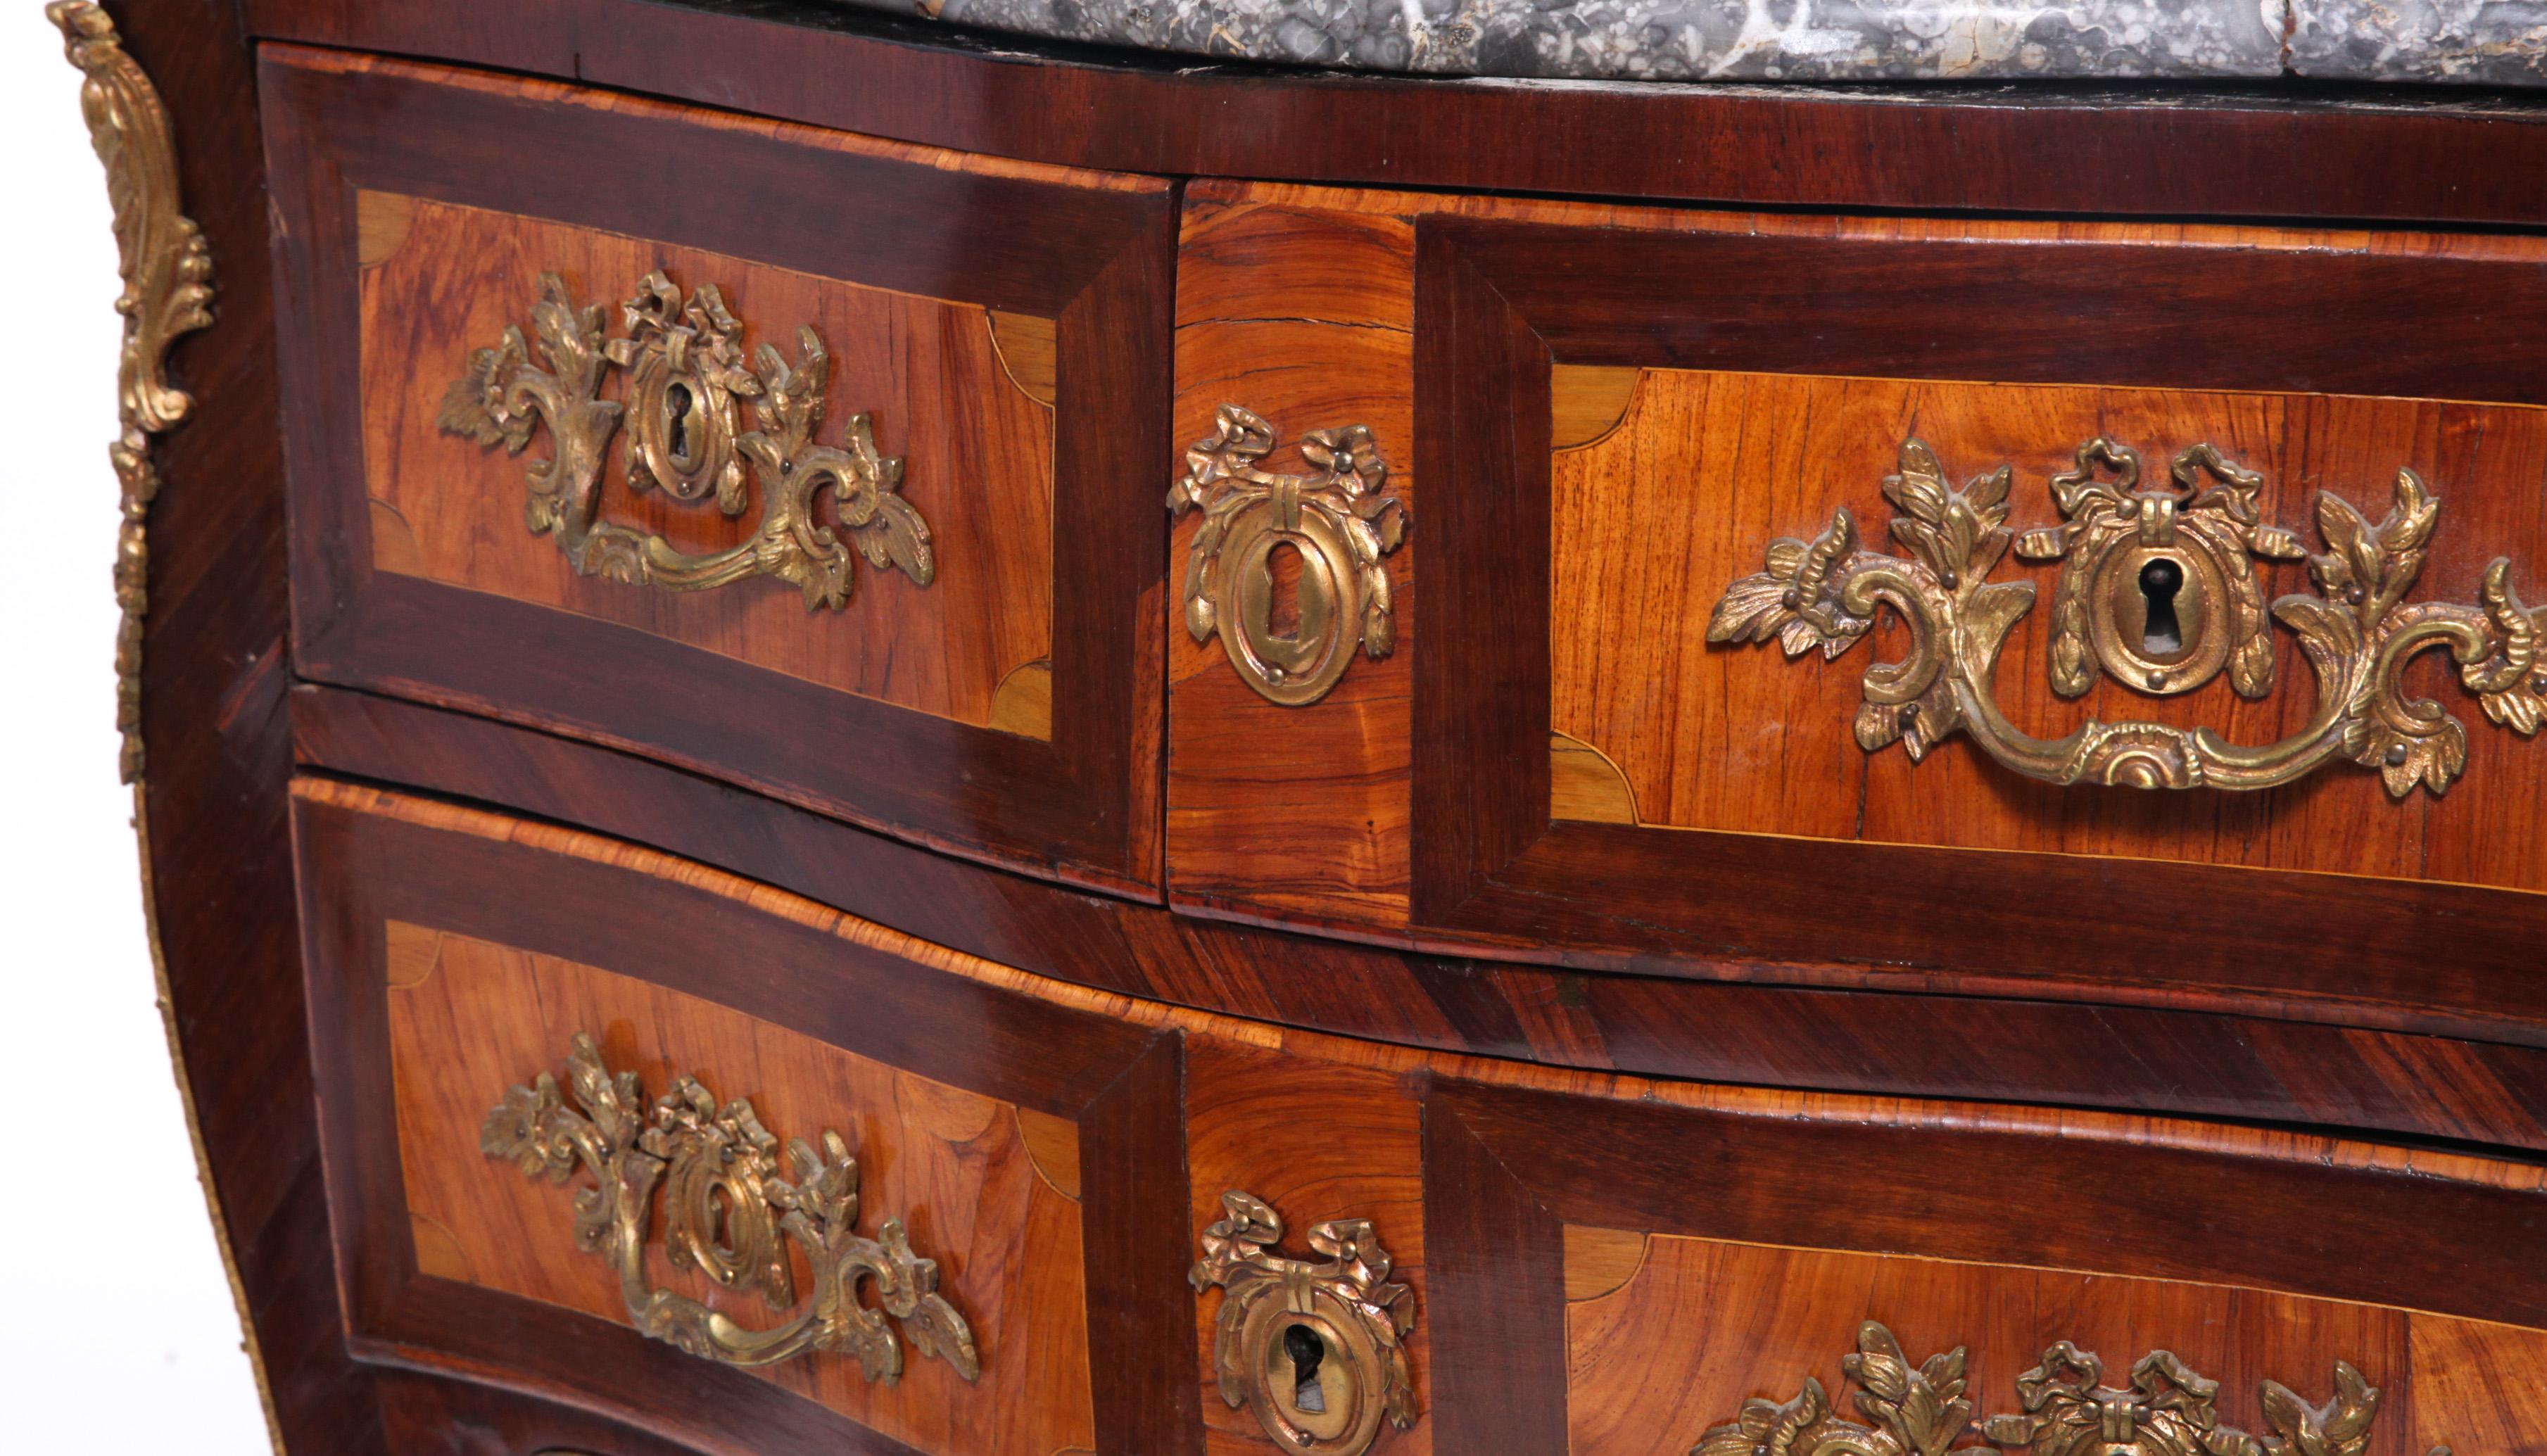 Louis XV style bombe commode with contrasting wood veneer. The piece has two small top drawers and one large bottom drawer as well as bronze mounts and hardware. In great antique condition with old repair work to the gray marble top.